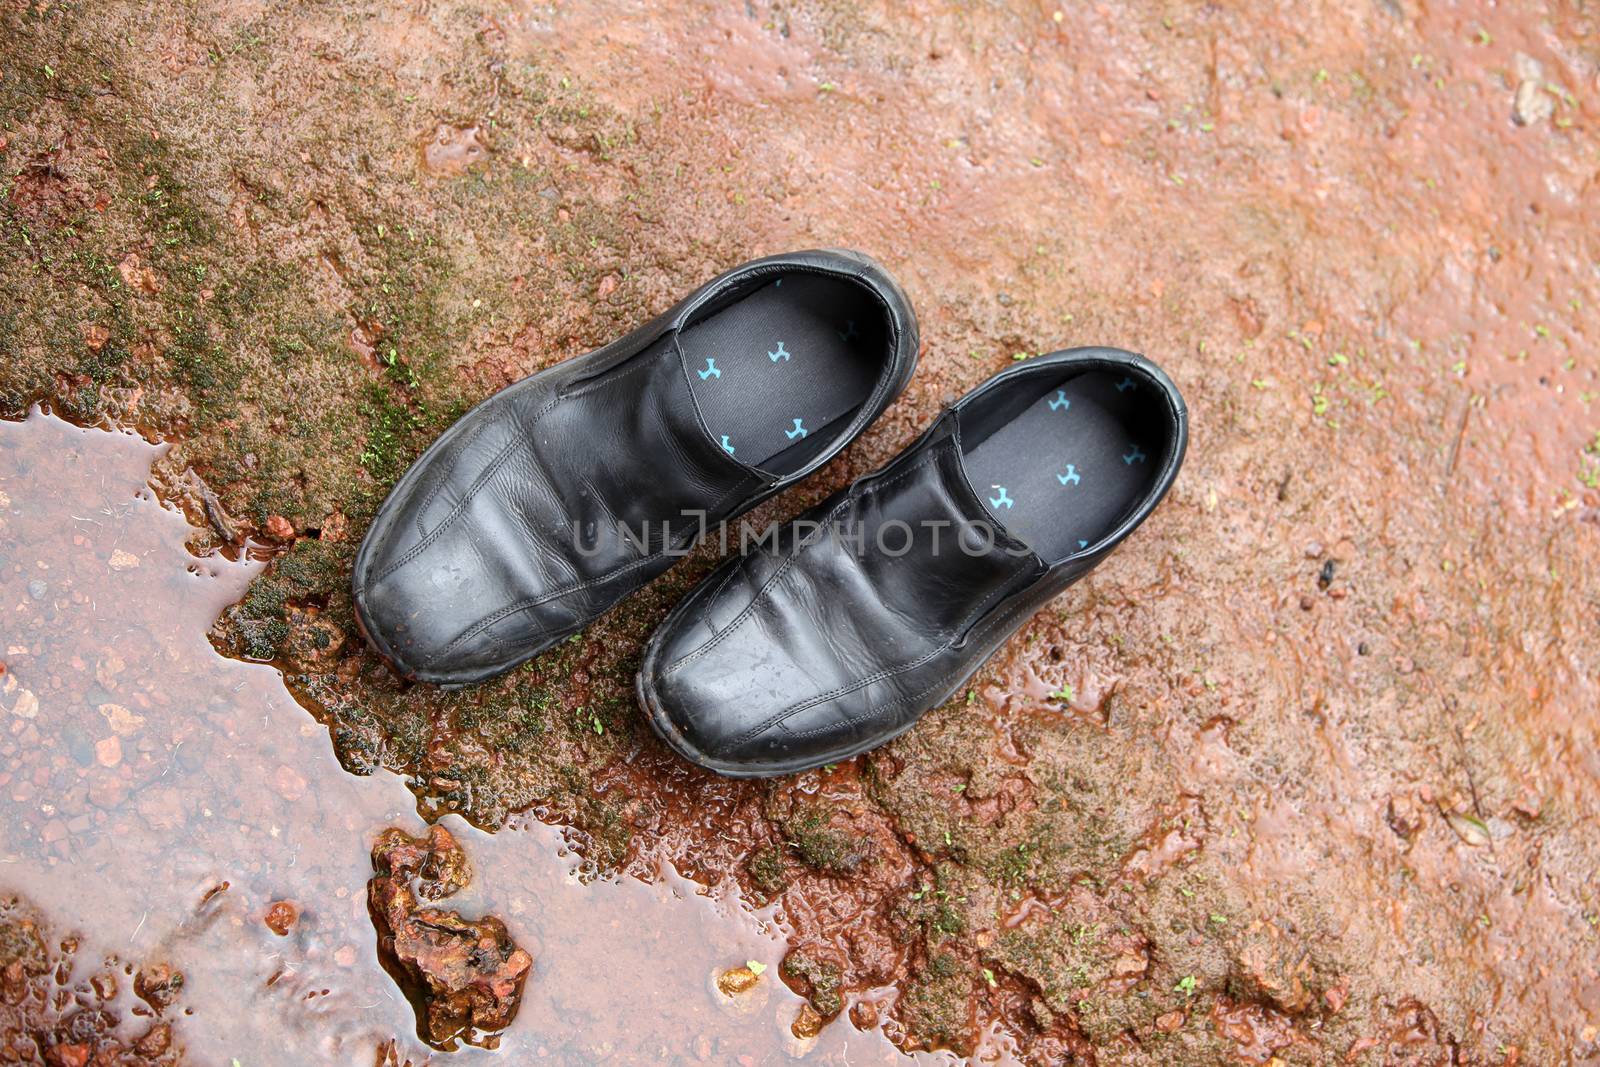 Black leather shoes abandoned on a rock in a camping trial